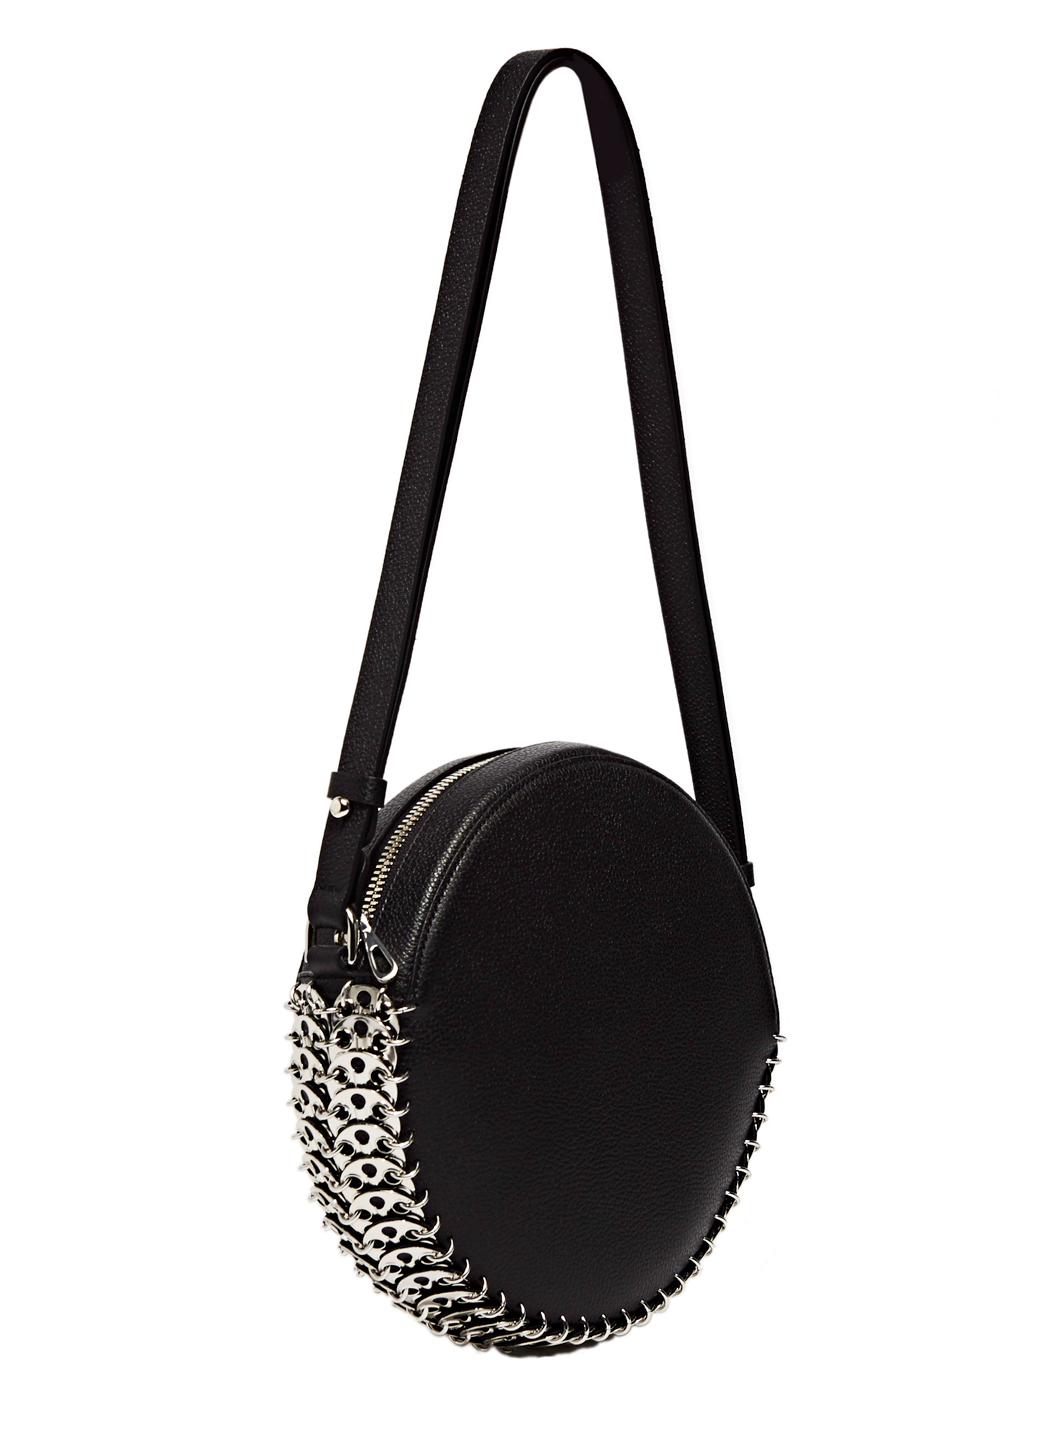 Lyst - Paco Rabanne Round Leather Chain Bag in Black